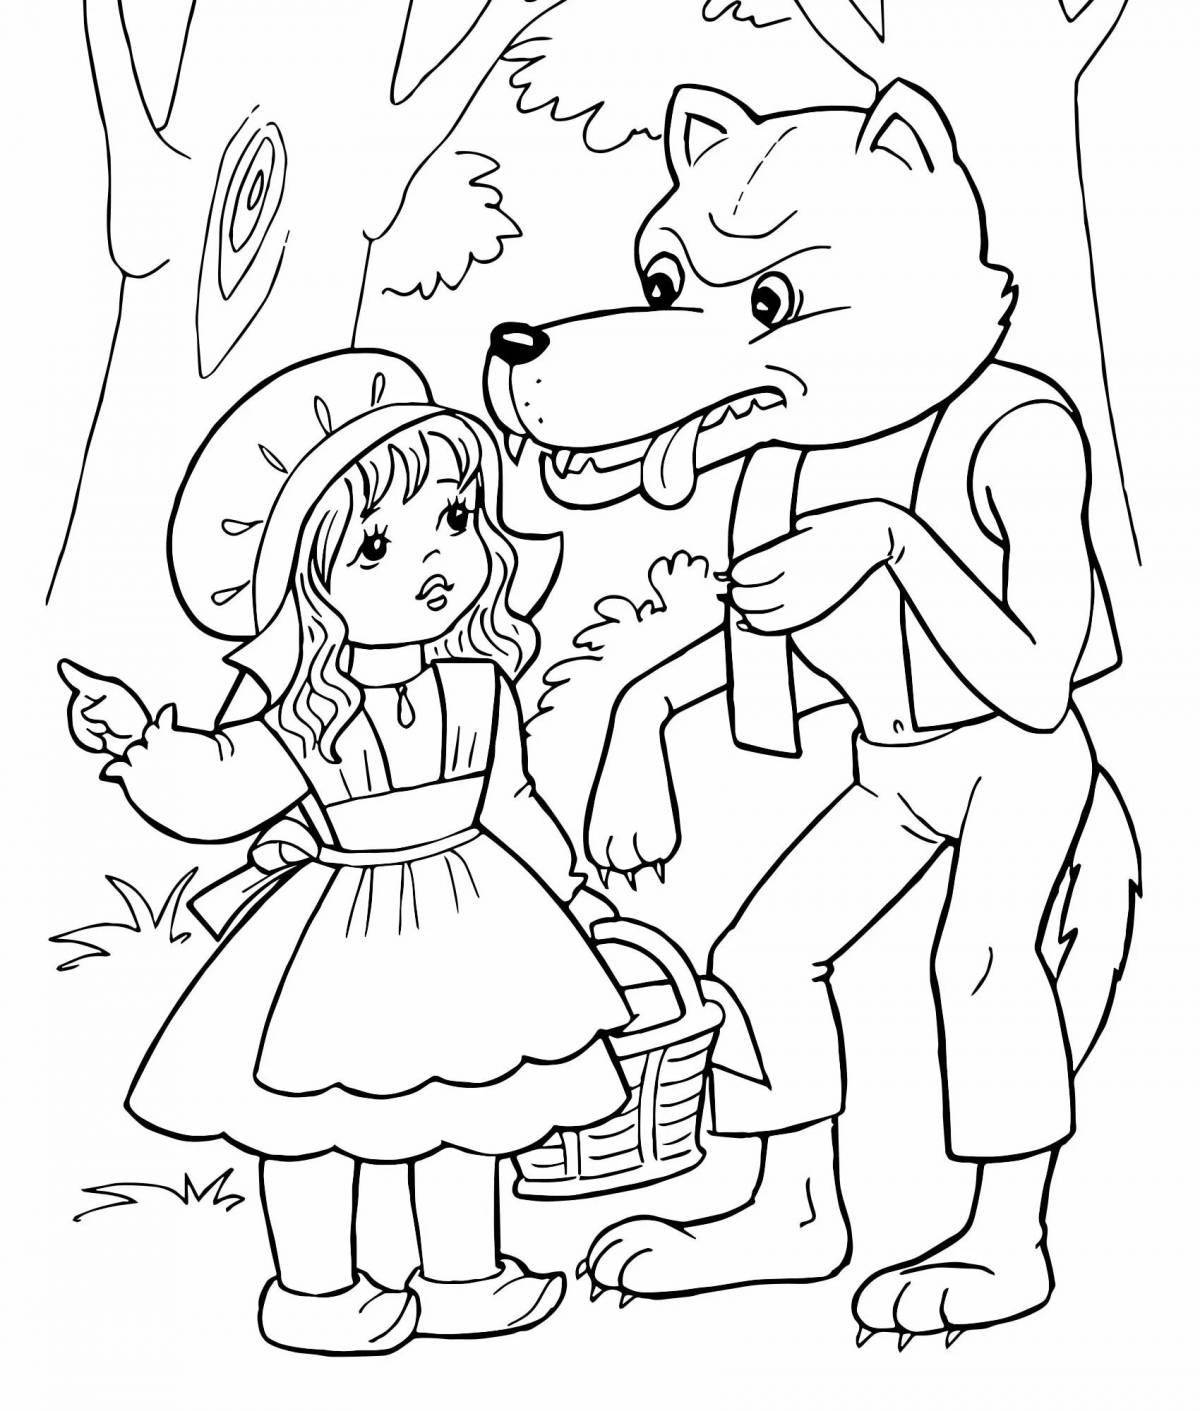 Magnificent Charles Perrault coloring Little Red Riding Hood